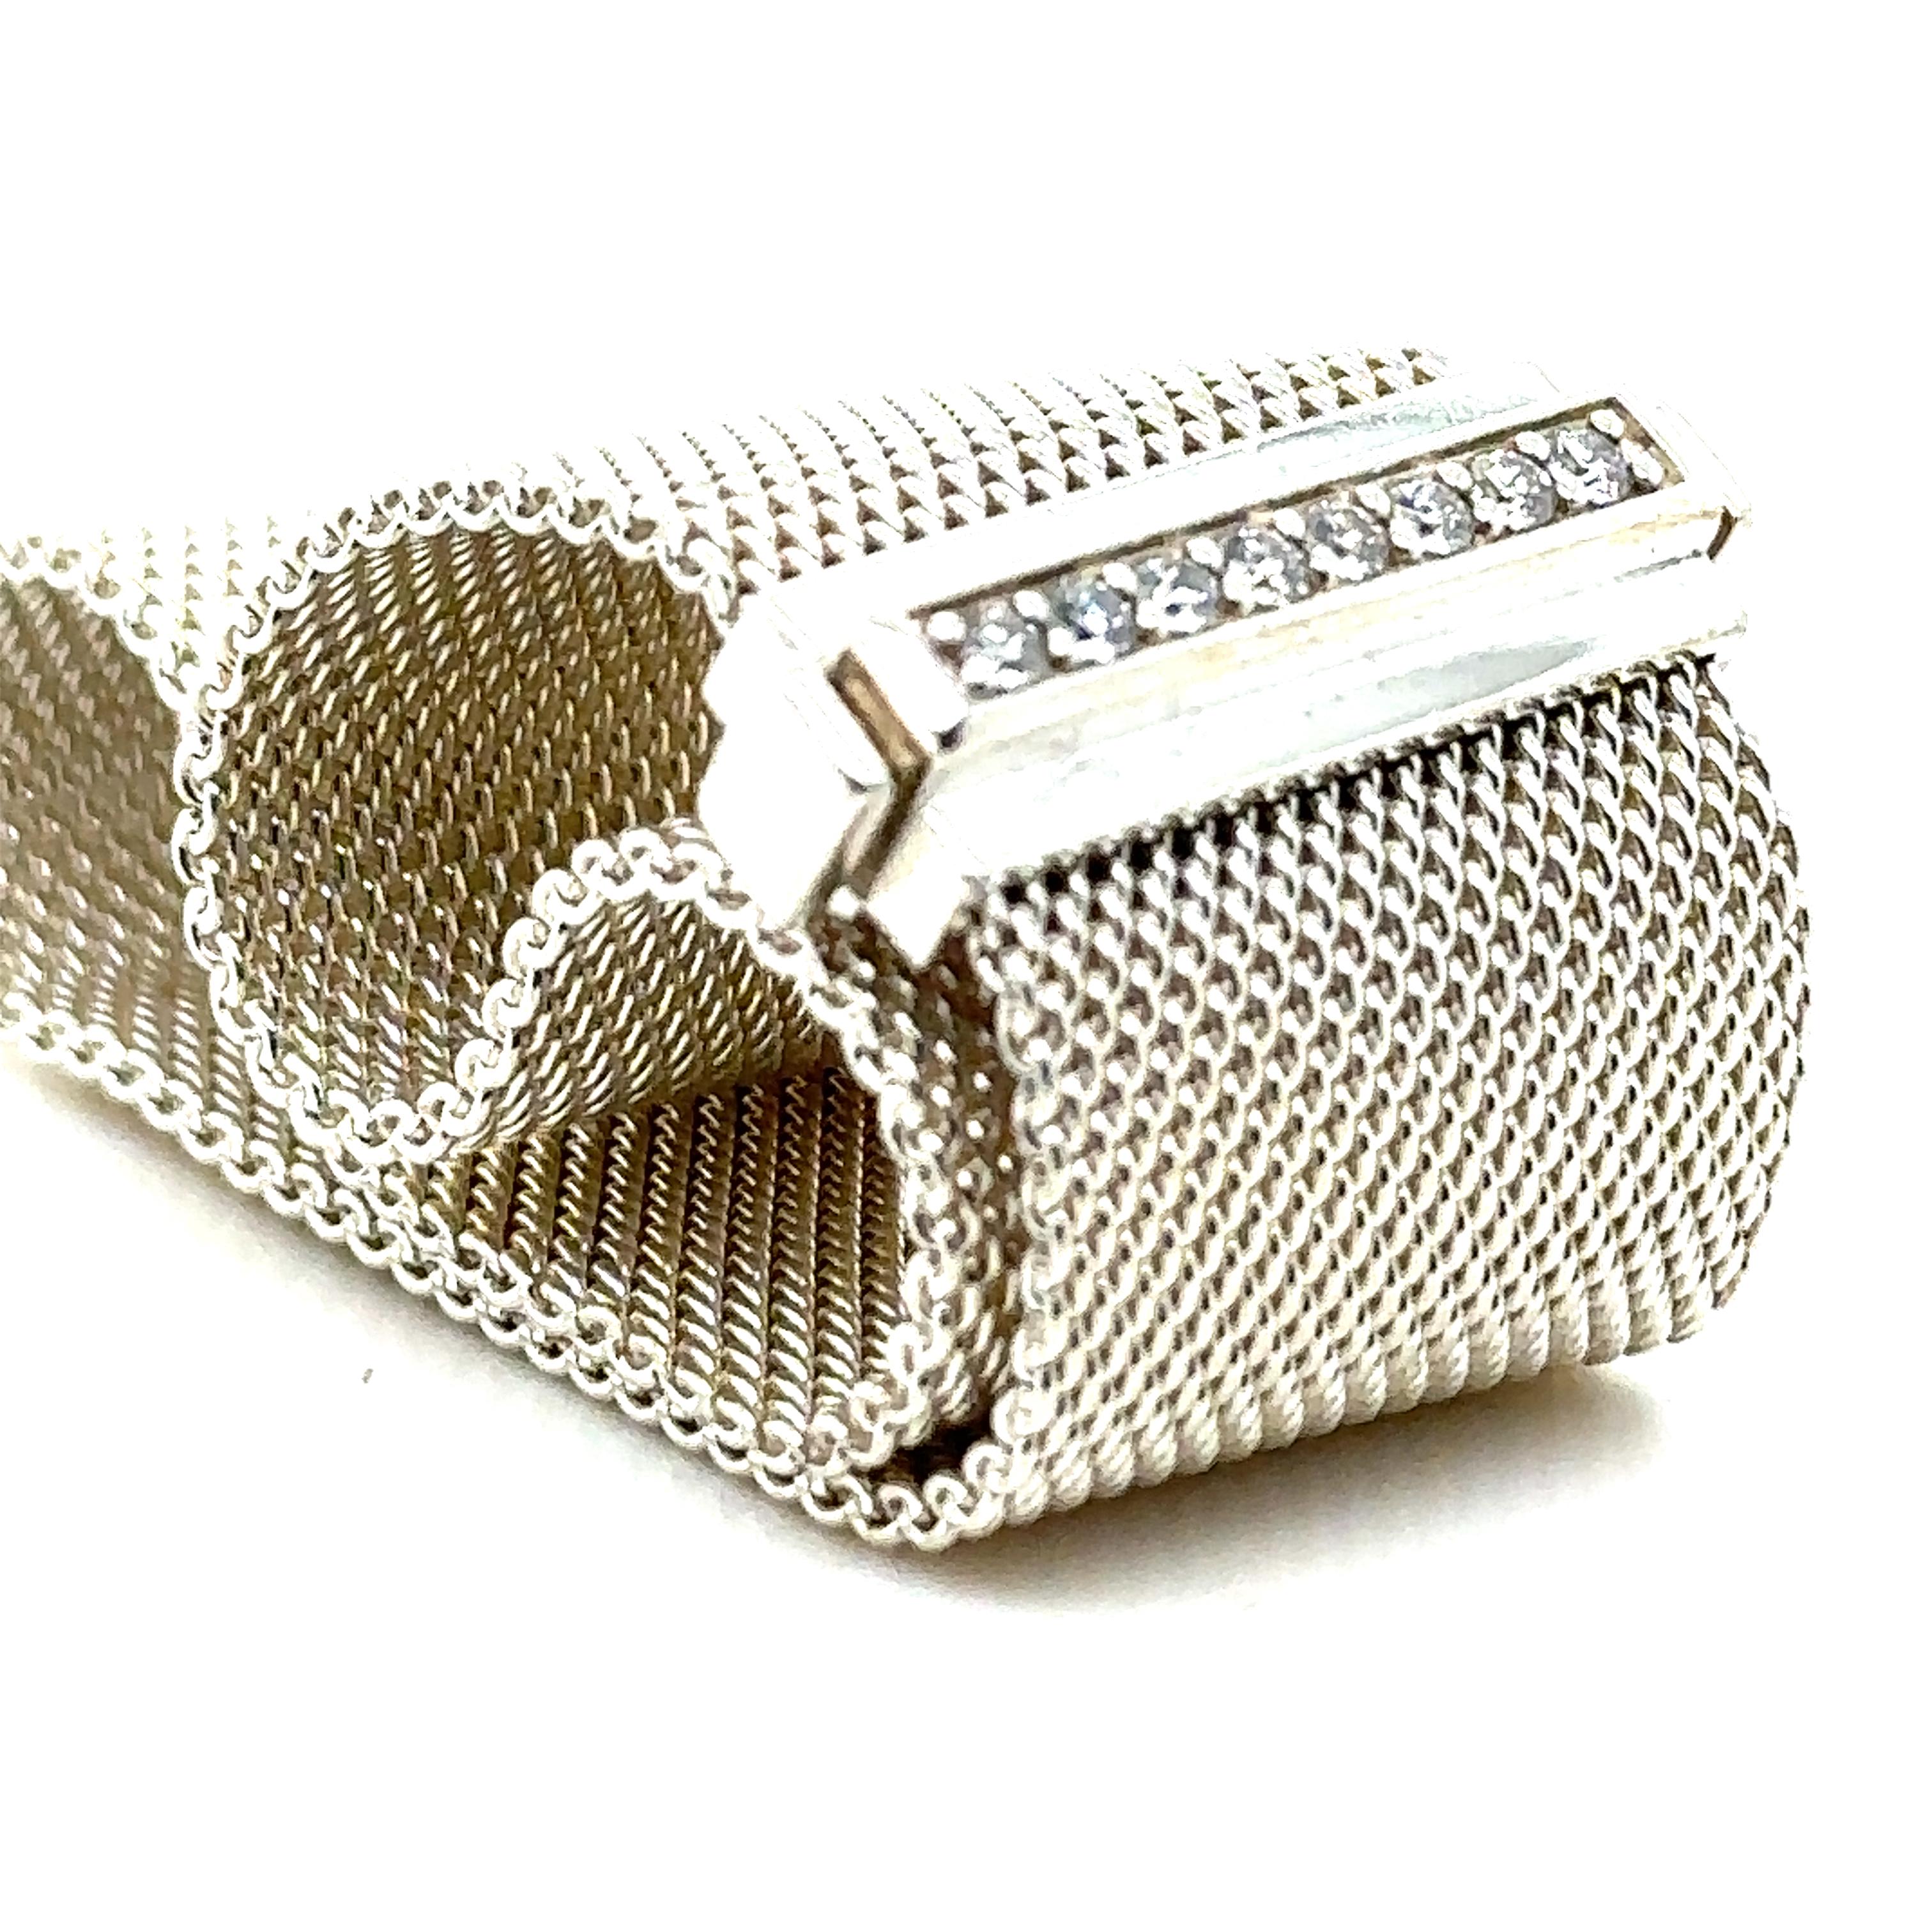 A Tiffany & Co Diamond Mesh Somerset Bracelet.

Casual and refined, modern and elegant. Wide bracelet in sterling silver with round brilliant diamonds.

Extremely Rare Piece - DISCONTINUED IN 2015

Metal: 925 Sterling Silver
Carat: 0.21ct
Colour: